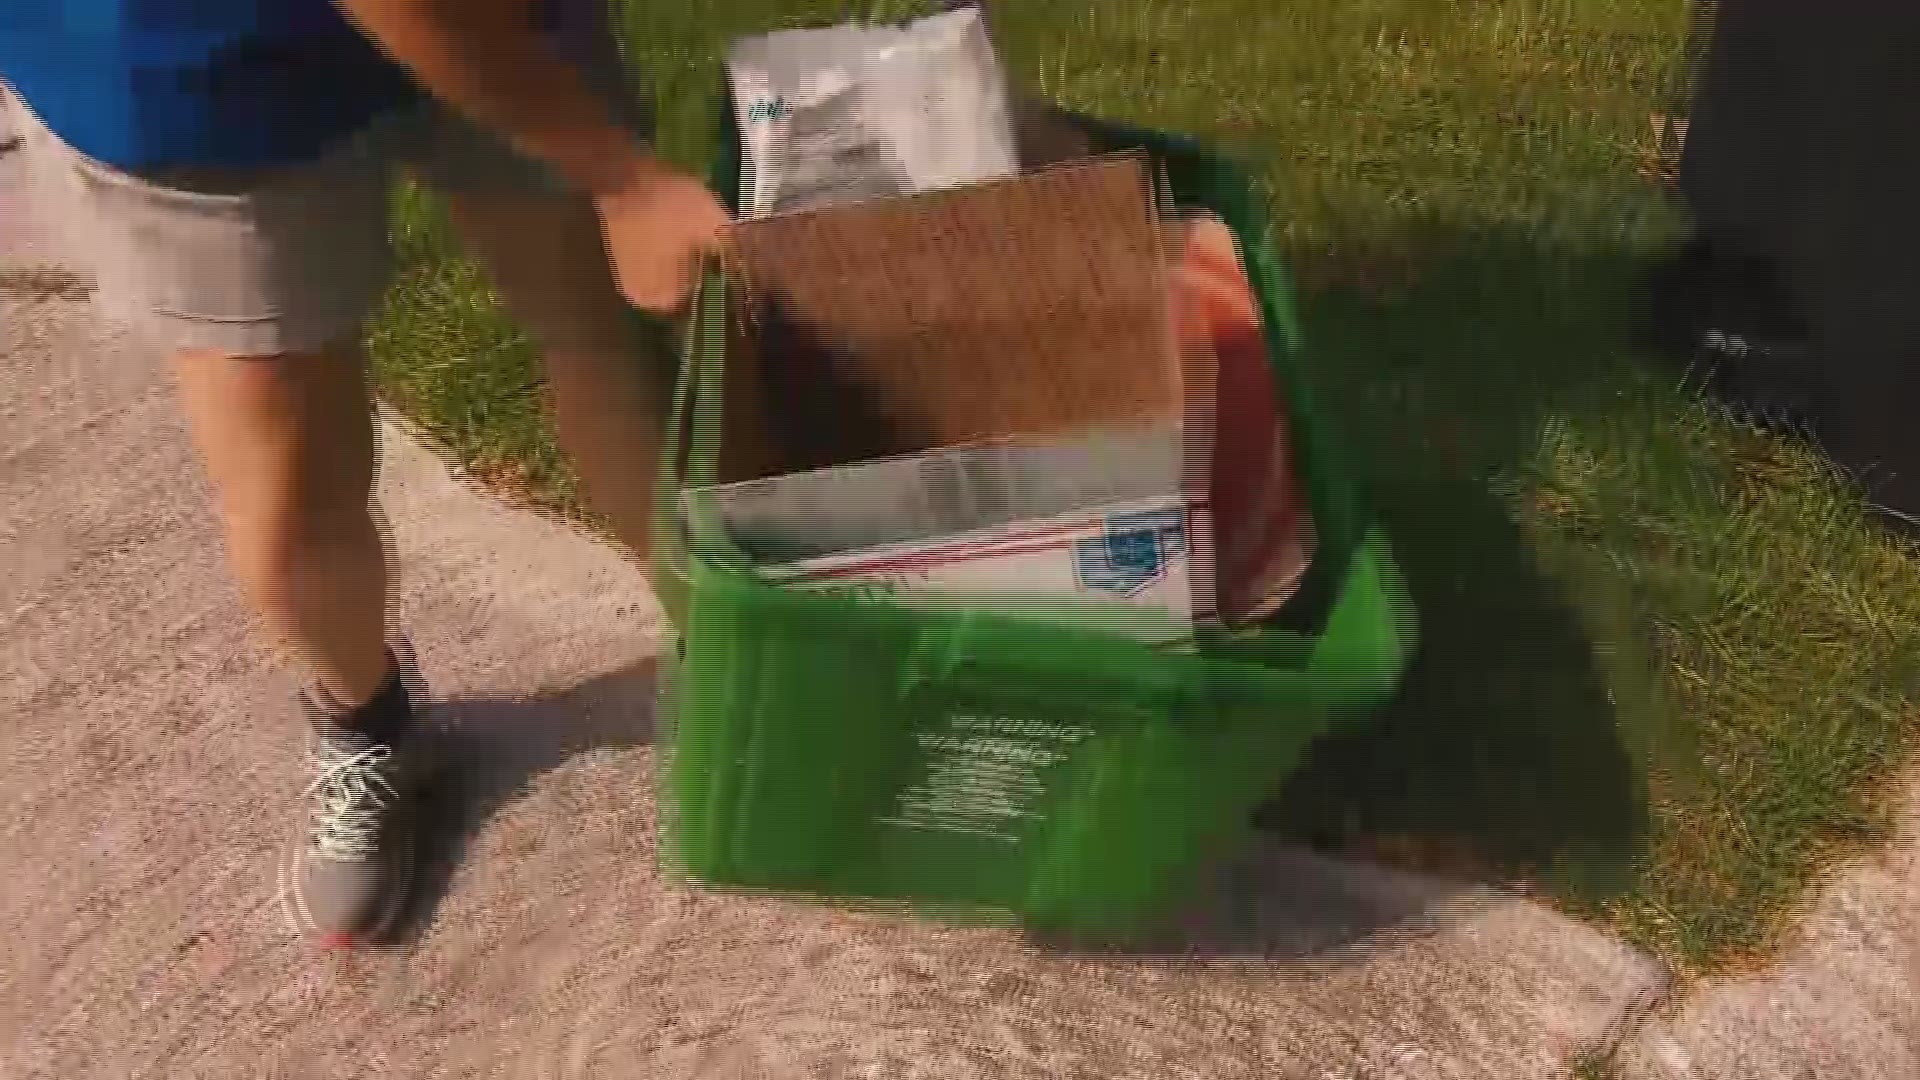 Records obtained by KHOU 11 Investigates reveal the city broke its own recycling rules hundreds of times.